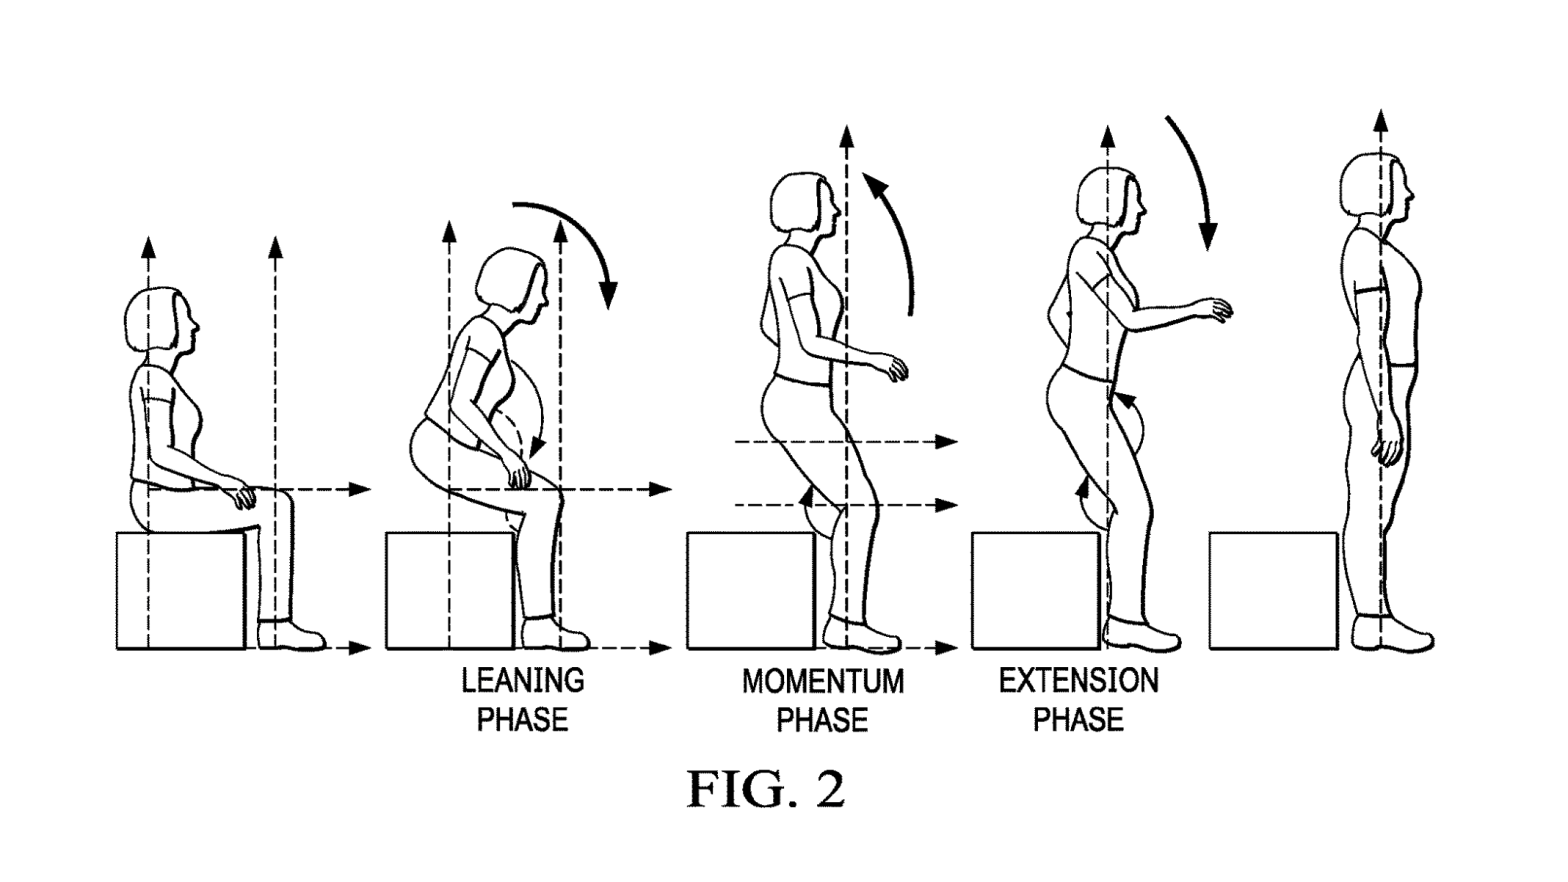 One of Apple's most-recently released patents describes how a headset and another electronic device could determine all the different stages of a person standing up from a seated position. (Screenshot: Apple / Gizmodo)